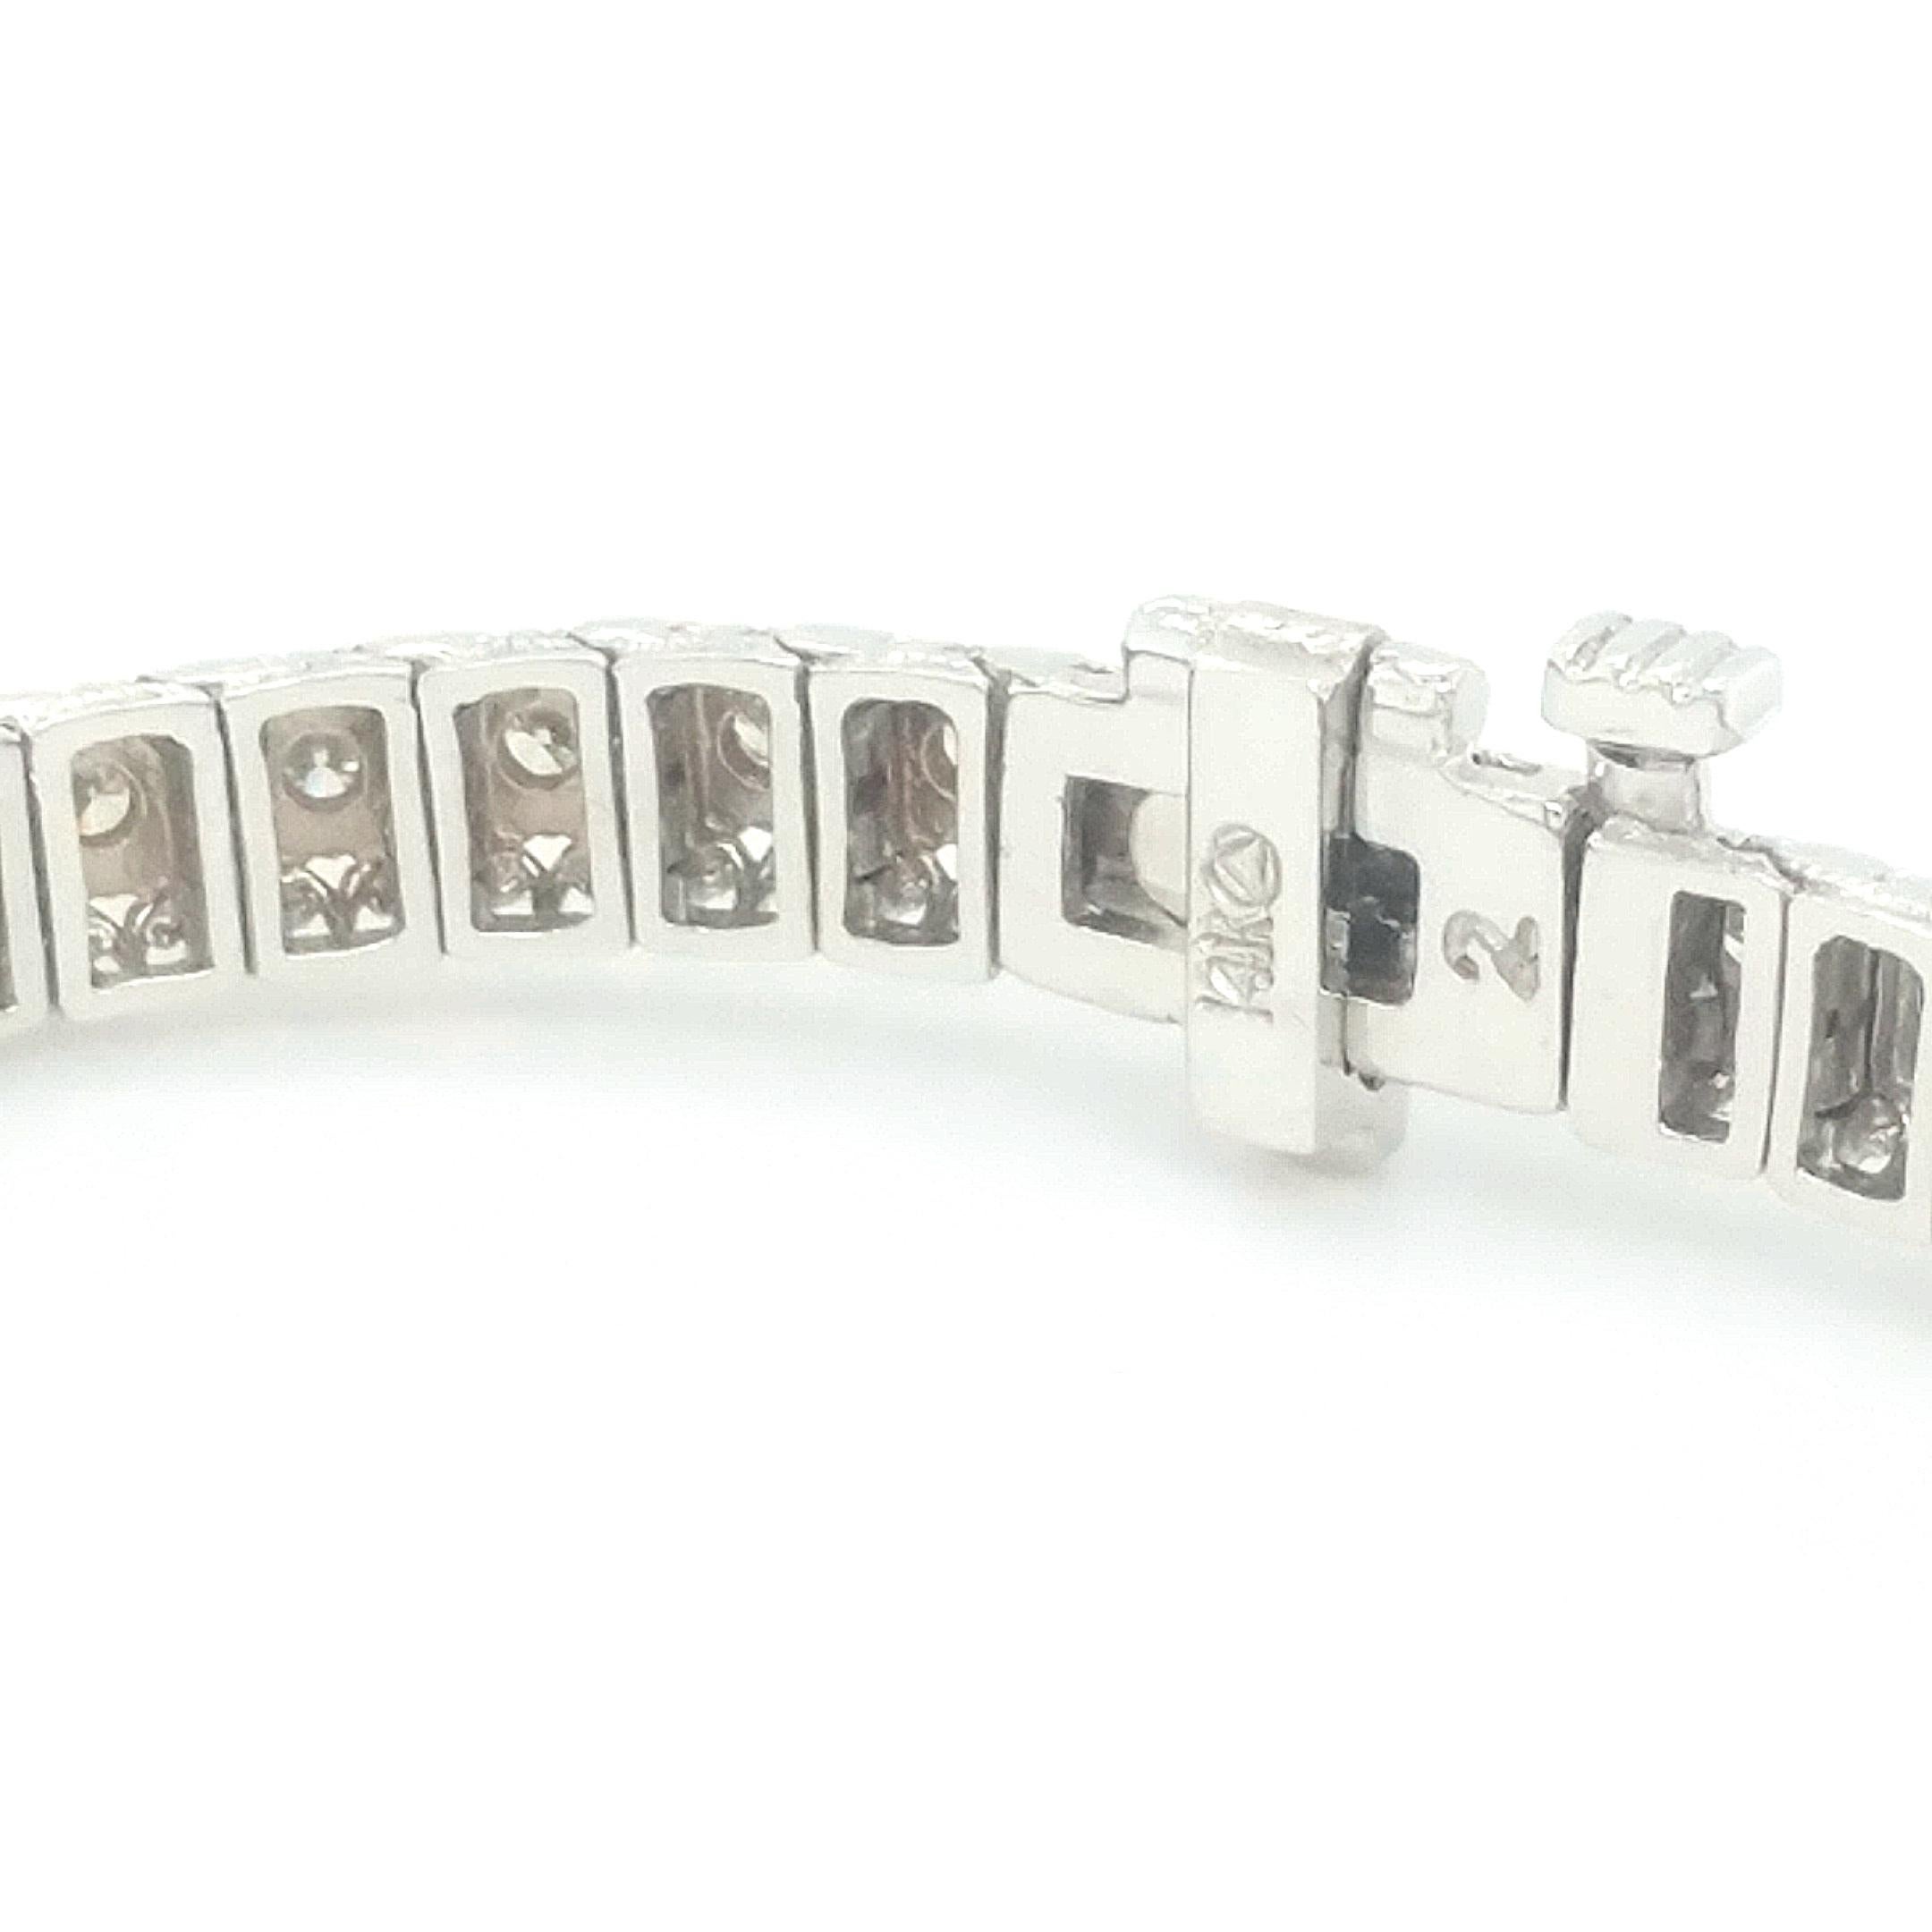 A beautiful white gold bracelet set with round brilliant cut white diamonds. This bracelet is studded with 57 round brilliant cut diamonds. All the stones are prong set. The total diamond weight is 2.00ct. The white diamonds are H-I color and SI2/I1